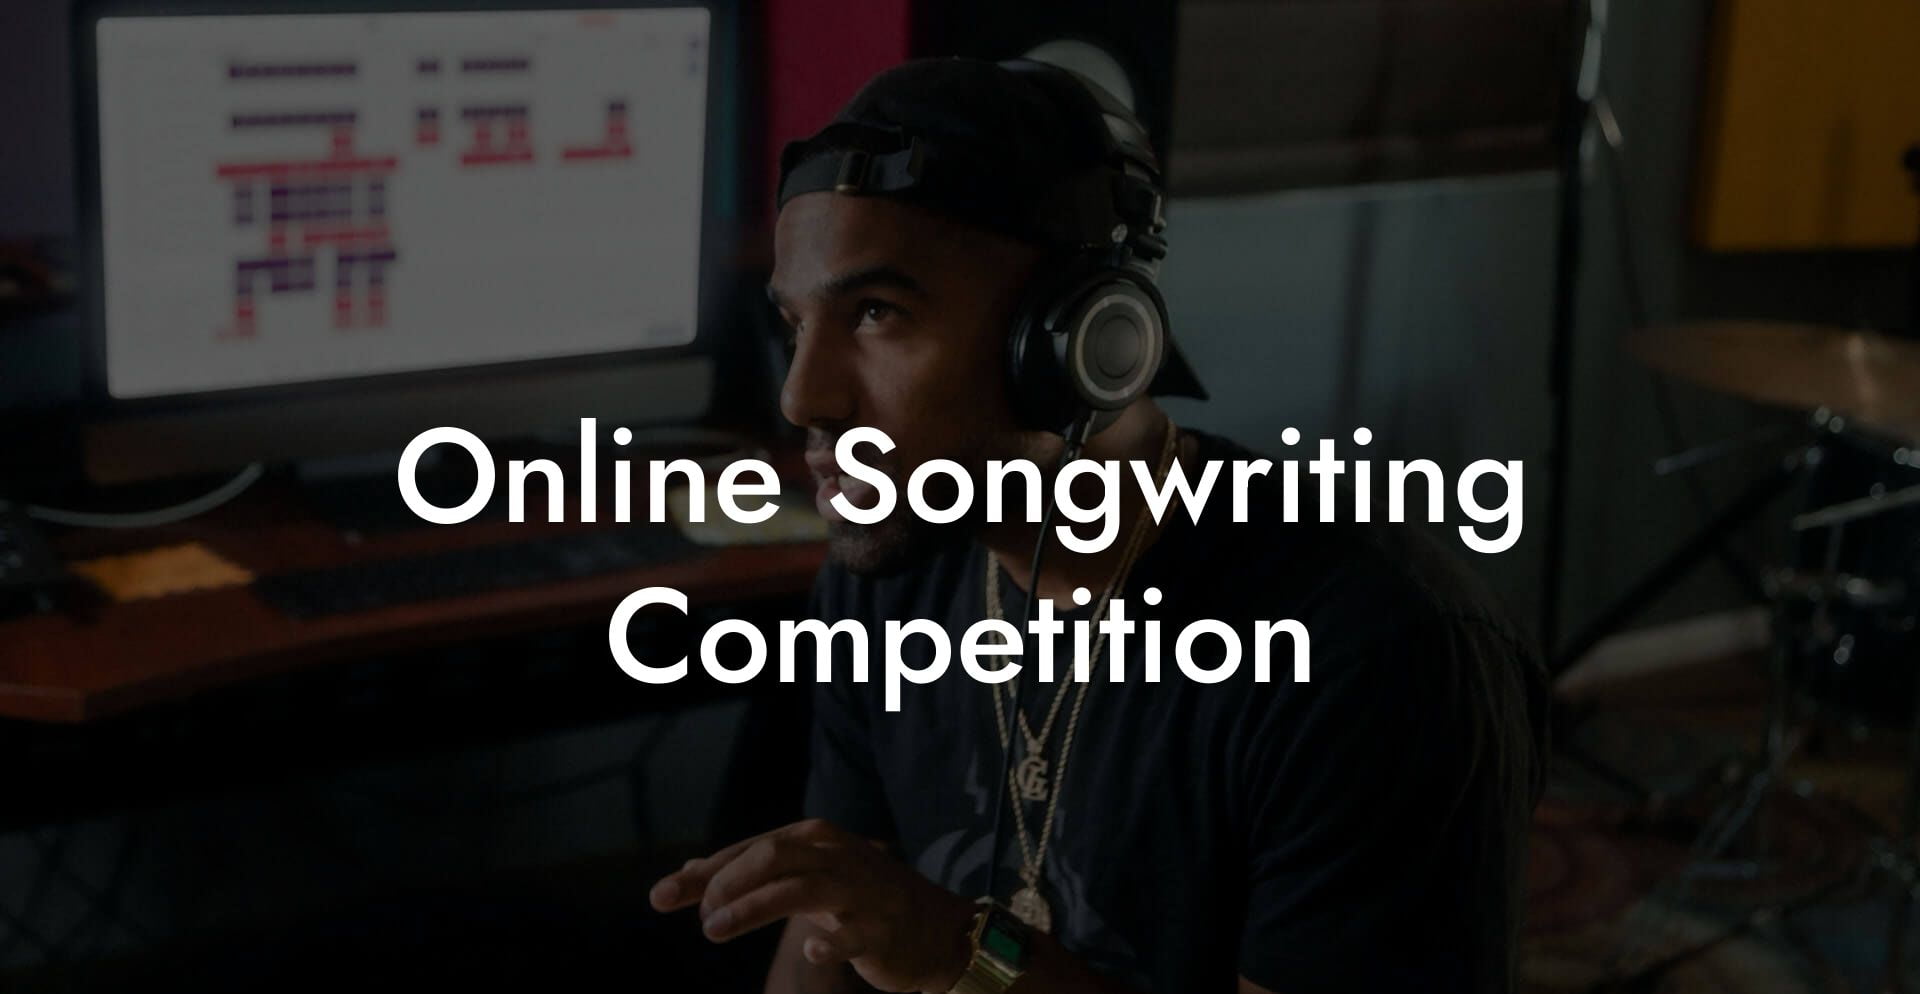 online songwriting competition lyric assistant